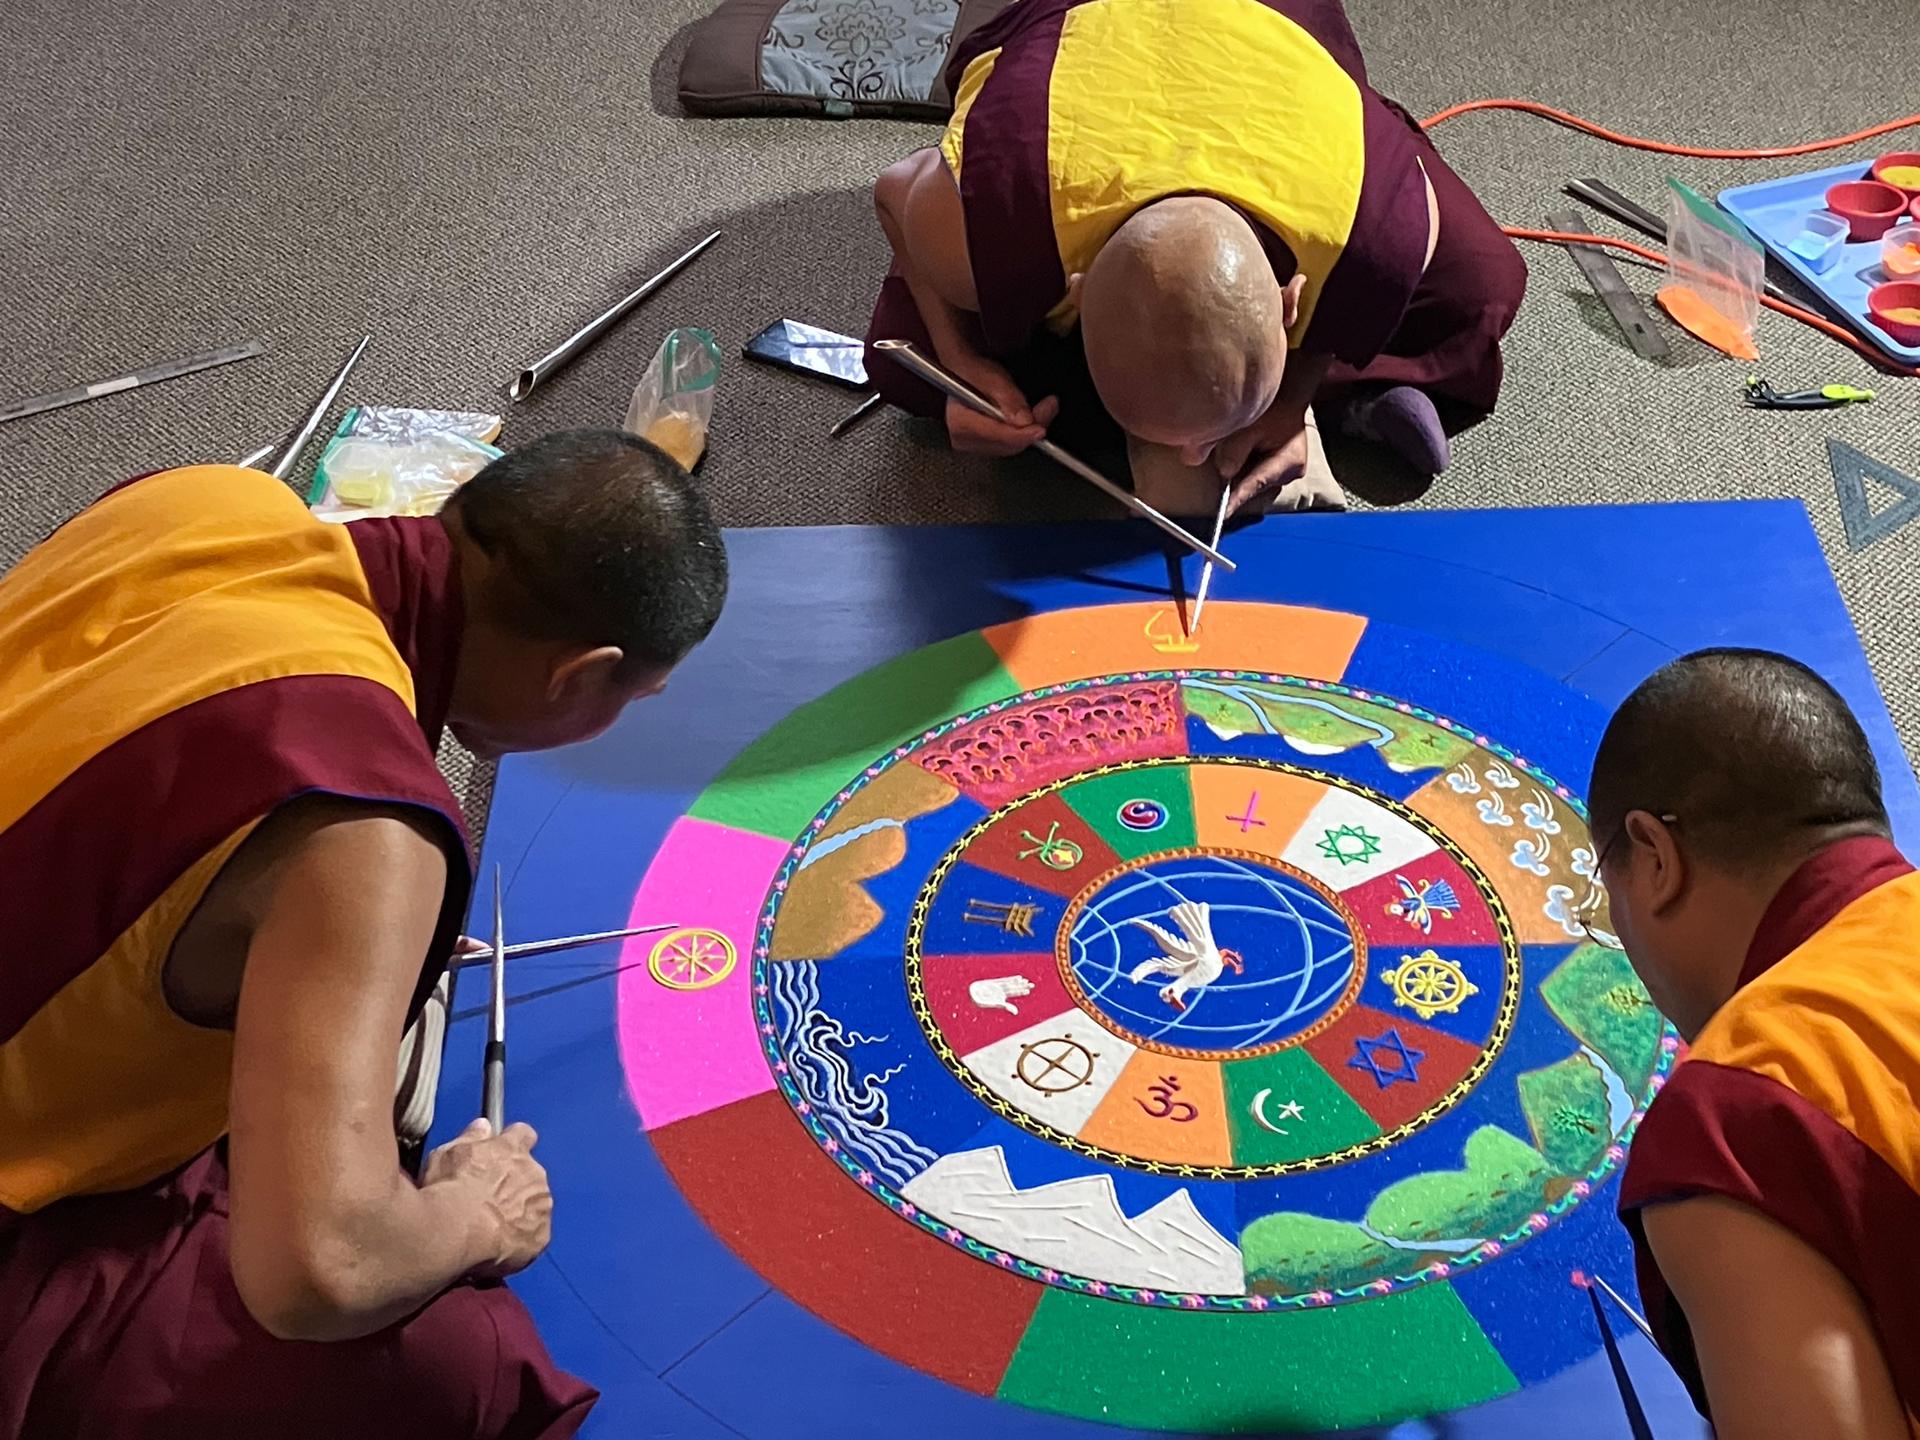 Tibetan Buddhist practices like the sand mandala date back to the time of the Buddha himself on earth, lead monk Geshe Khenrap Chaeden says.